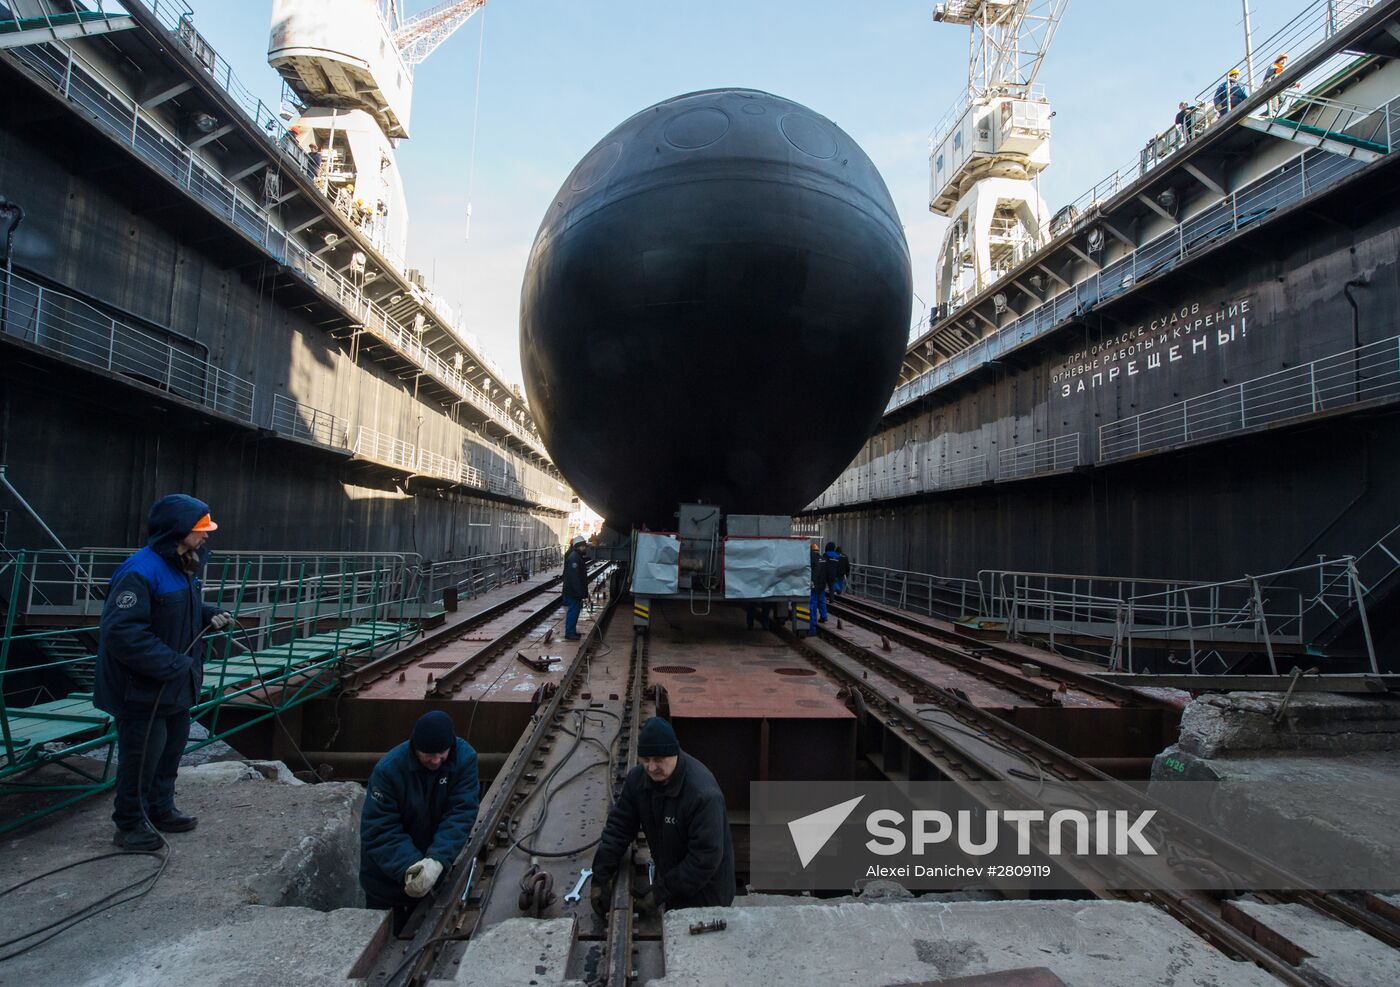 The launch of The Veliky Novgorod submarine in St. Petersburg